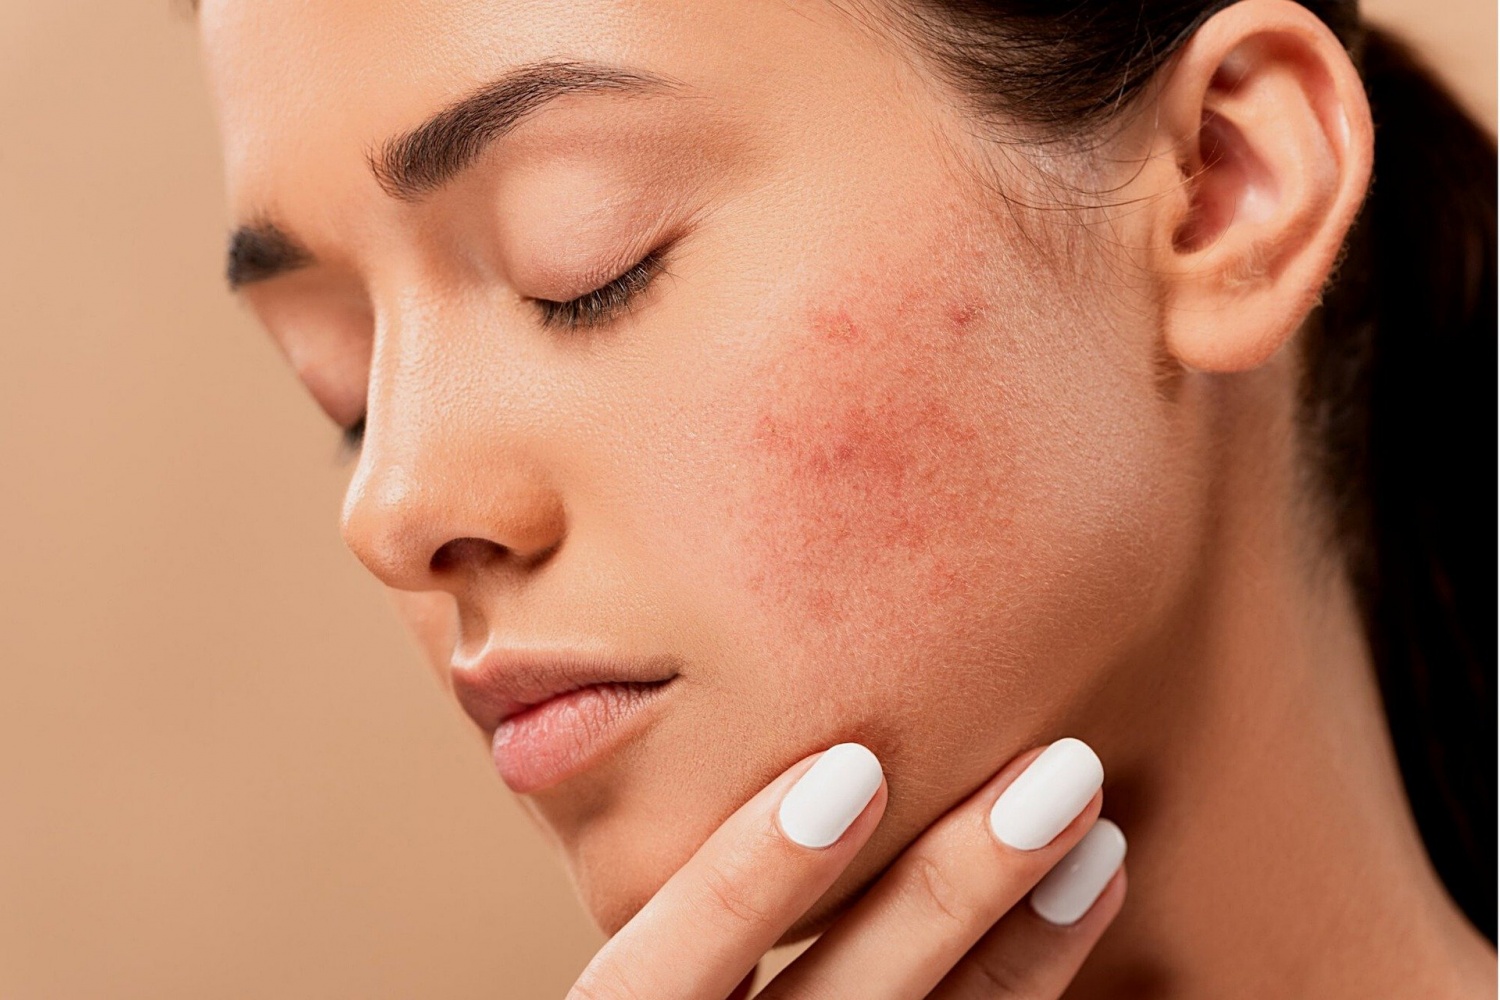 How To Get Rid Of Dark Marks From Acne Breakouts